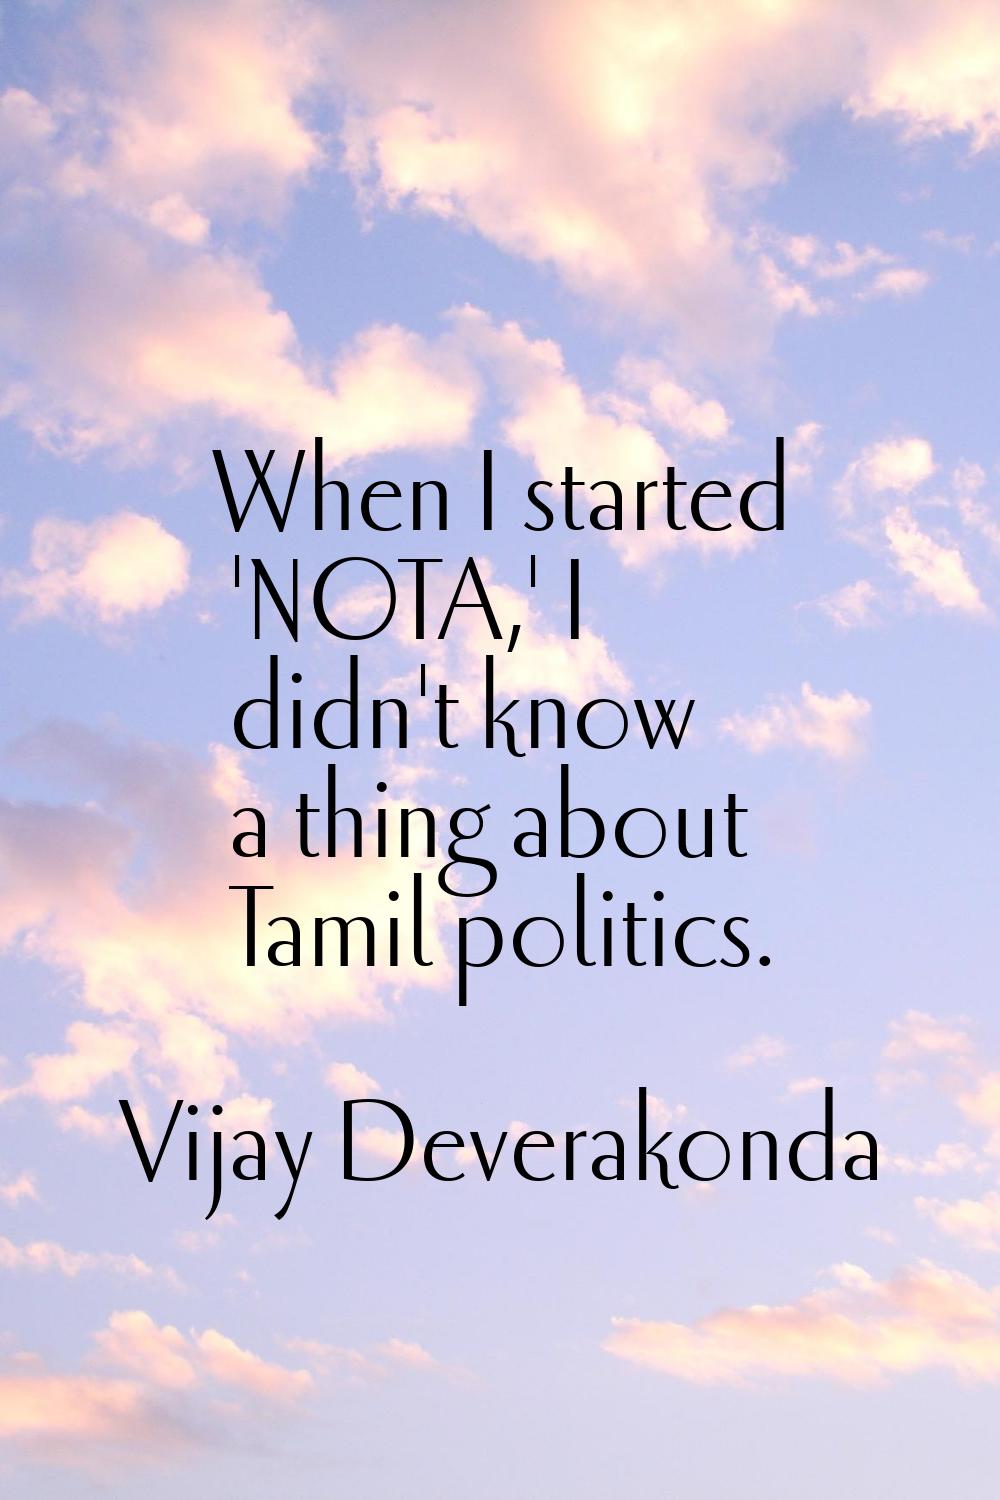 When I started 'NOTA,' I didn't know a thing about Tamil politics.